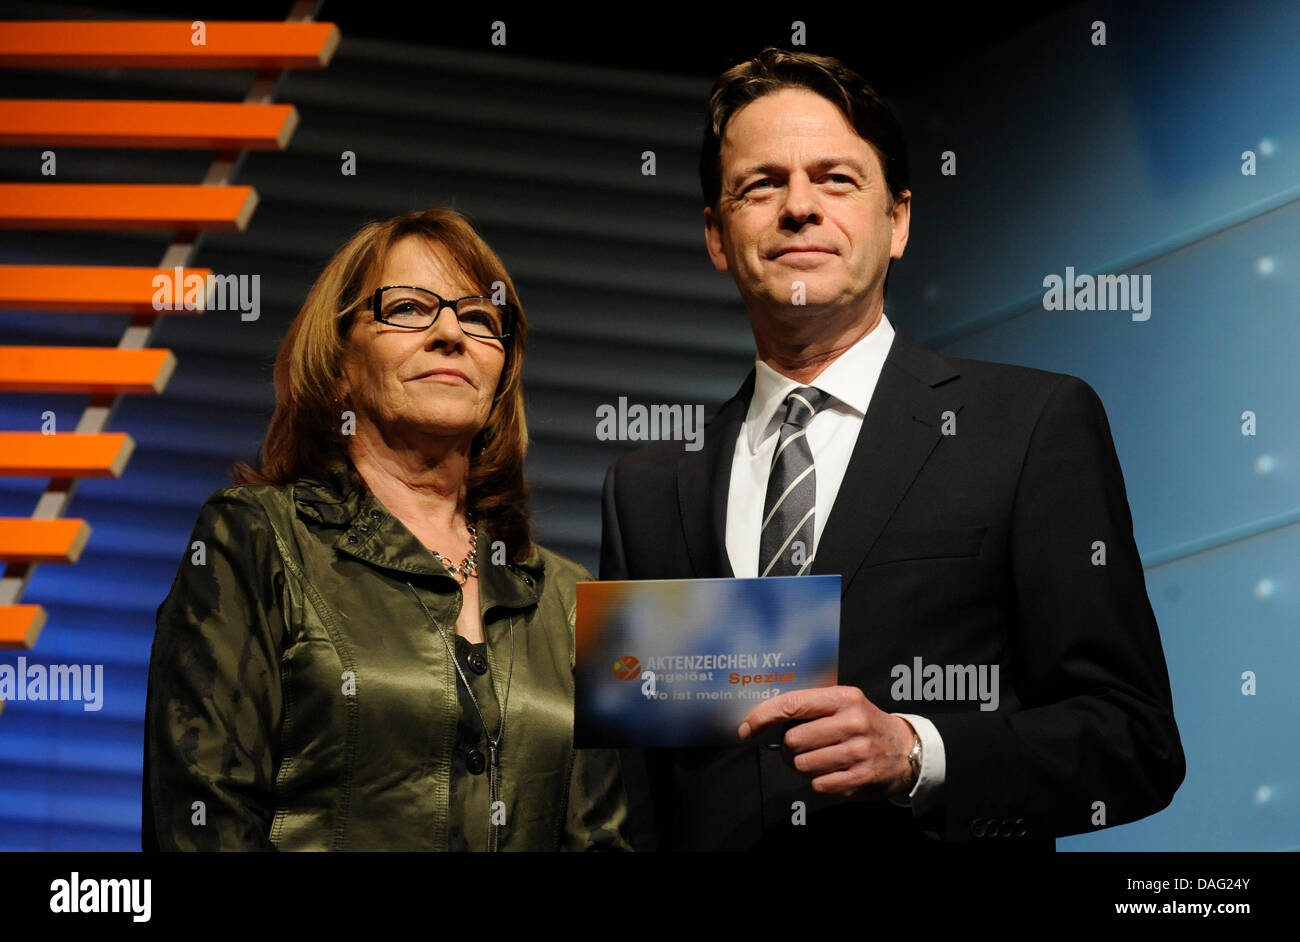 Brigitte Sirny-Kampusch (L), the mother of Natascha Kampusch, stands next to Rudi Cerne, host of German crime prevention show  'Aktenzeichen XY... ungeloest' (File Reference XY   Unsolved) of the ZDF public television broadcaster, in a special edition of the show titled 'Where is my child' in Munich, Germany, 11 March 2011. The show aims to solve crimes with the help of the public. Stock Photo